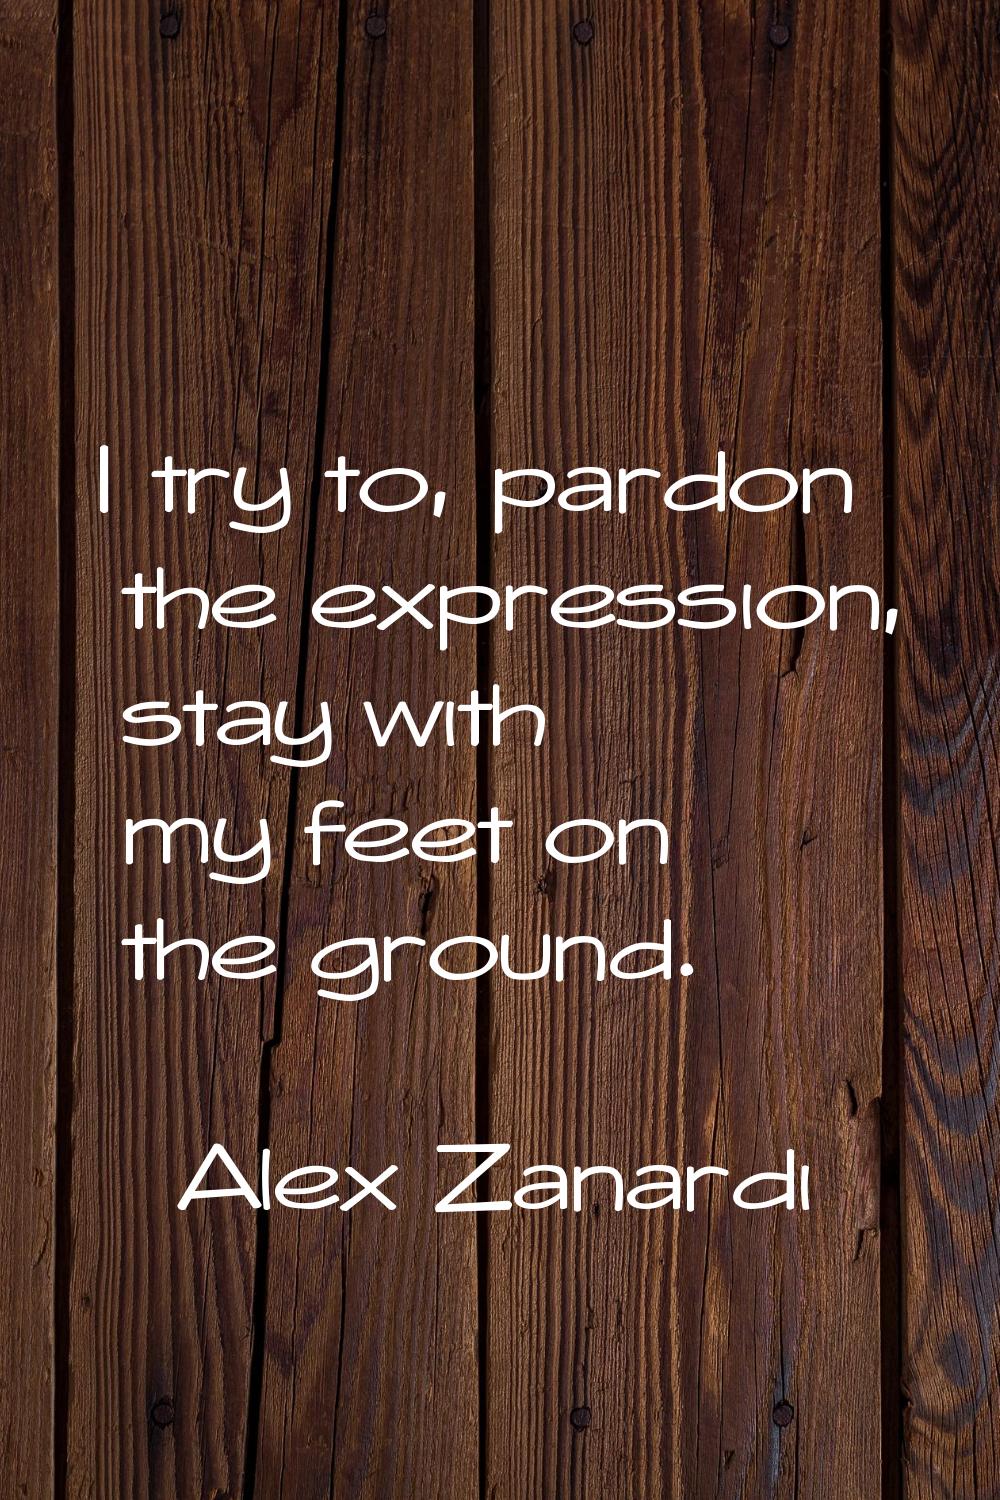 I try to, pardon the expression, stay with my feet on the ground.